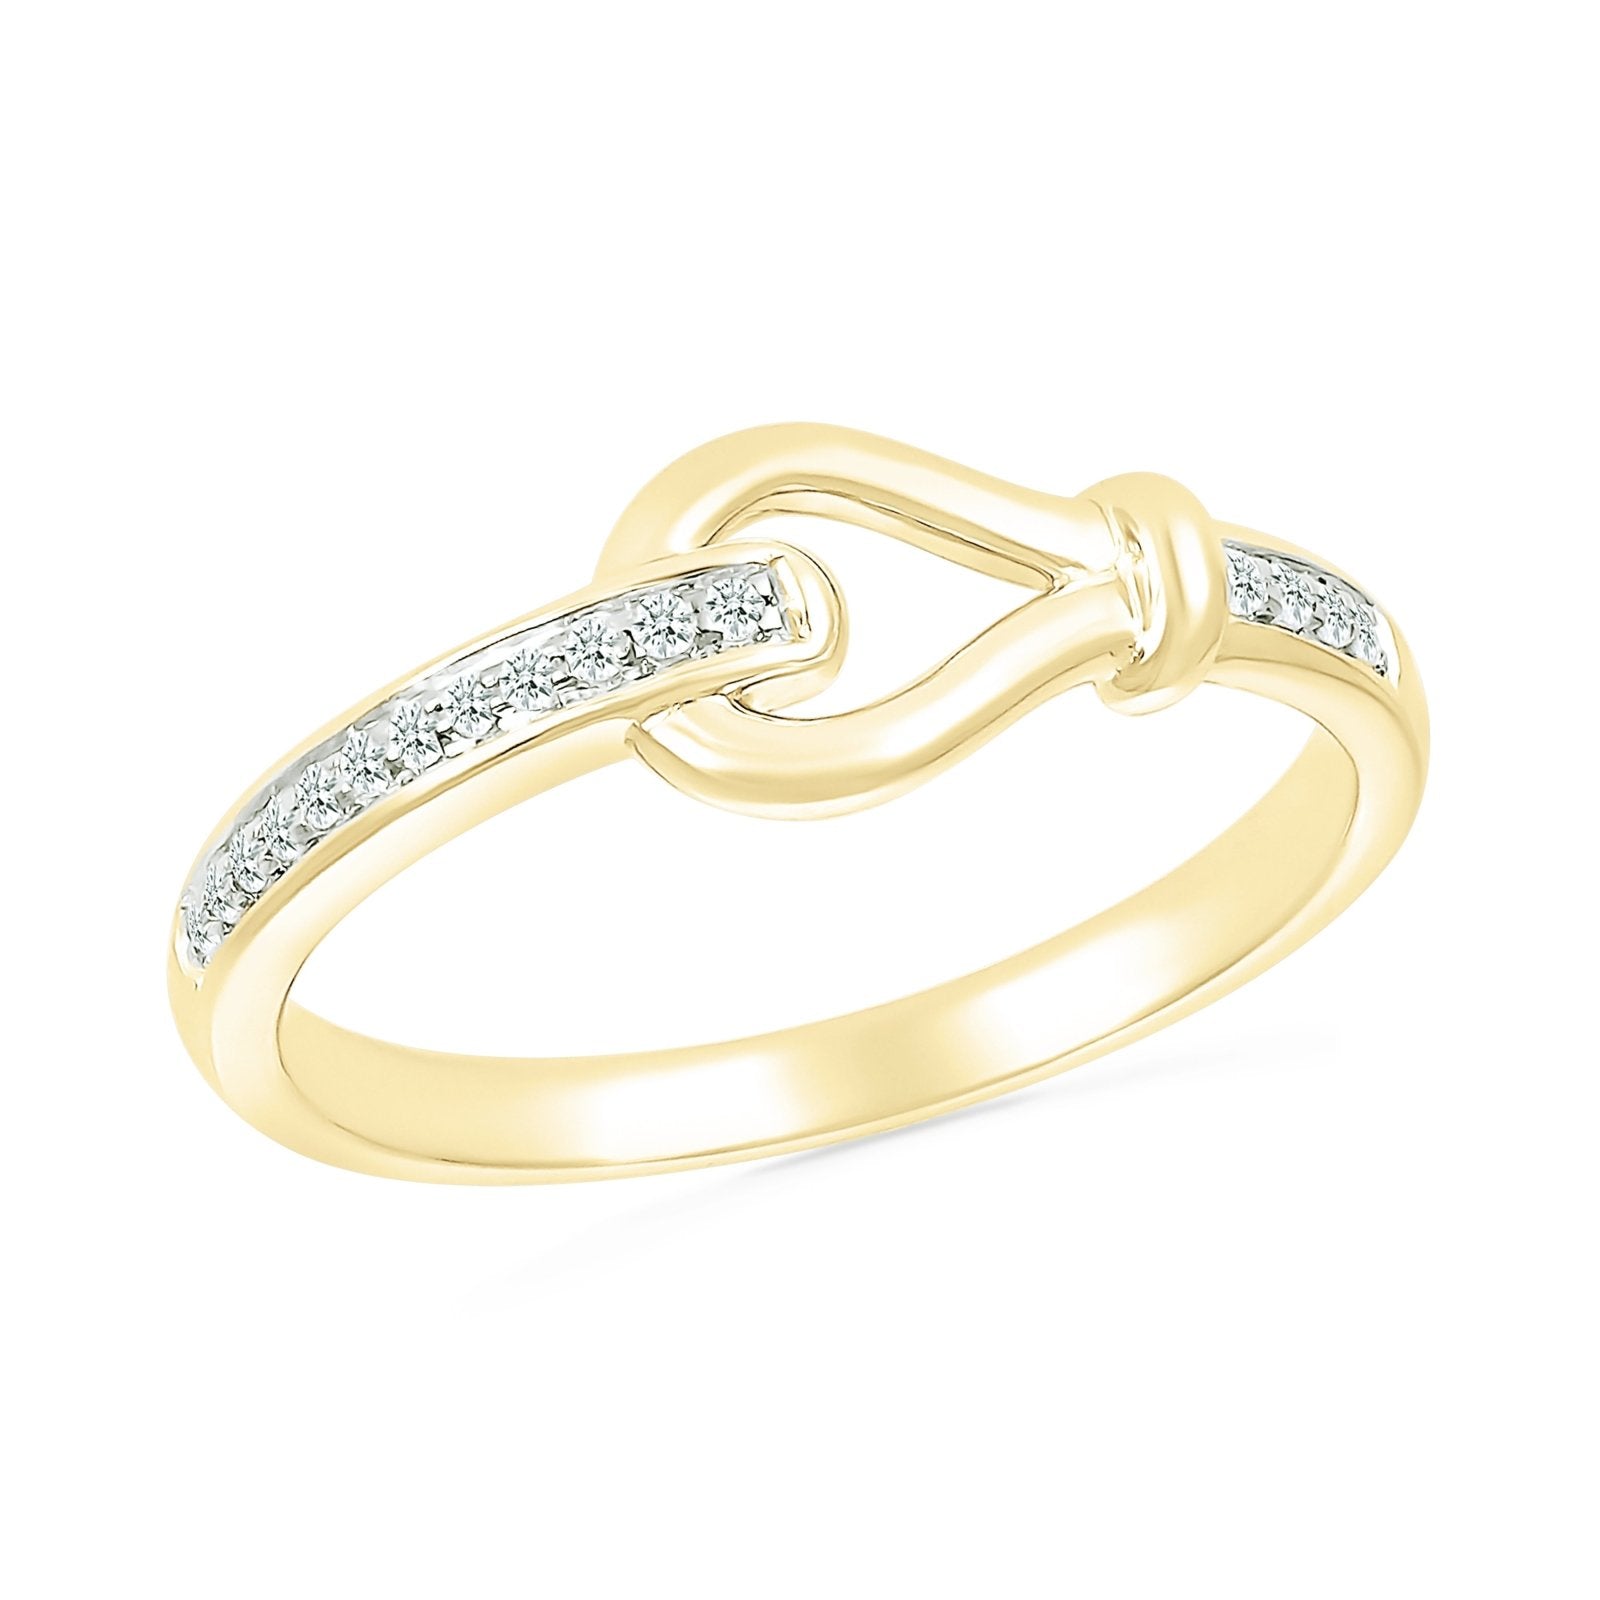 Diamond and Gold Loop Ring Rings Estella Collection #product_description# 32747 Diamond Made to Order Yellow Gold #tag4# #tag5# #tag6# #tag7# #tag8# #tag9# #tag10#